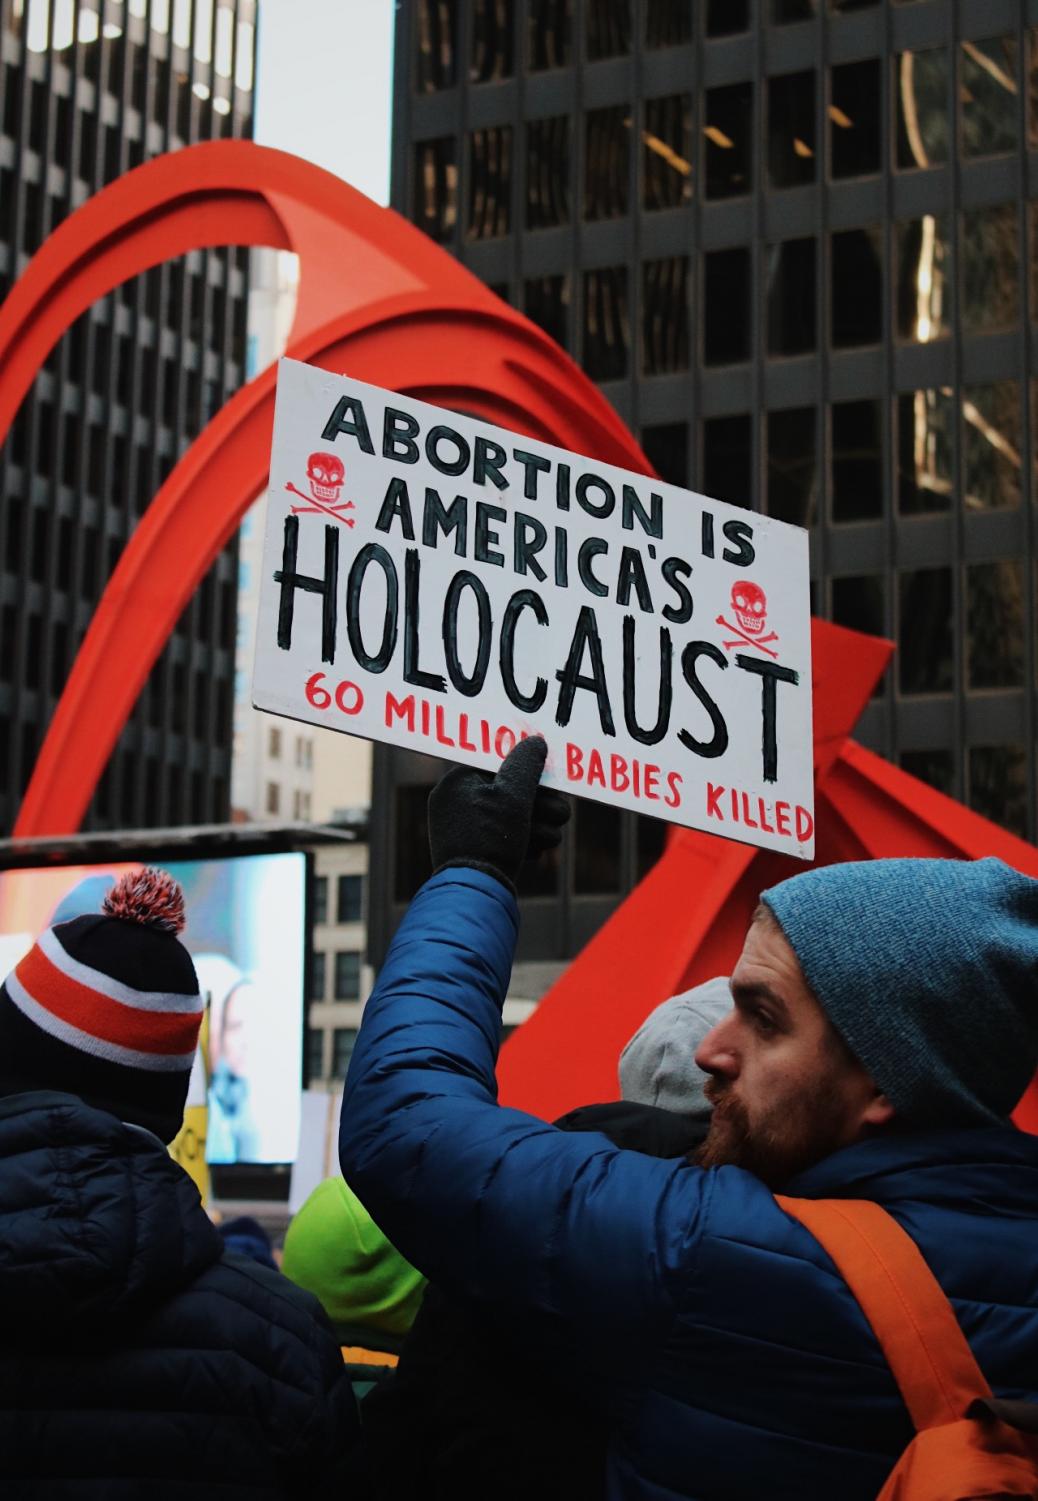 DePaul+pro-lifers+speak+out+at+March+for+Life+rally